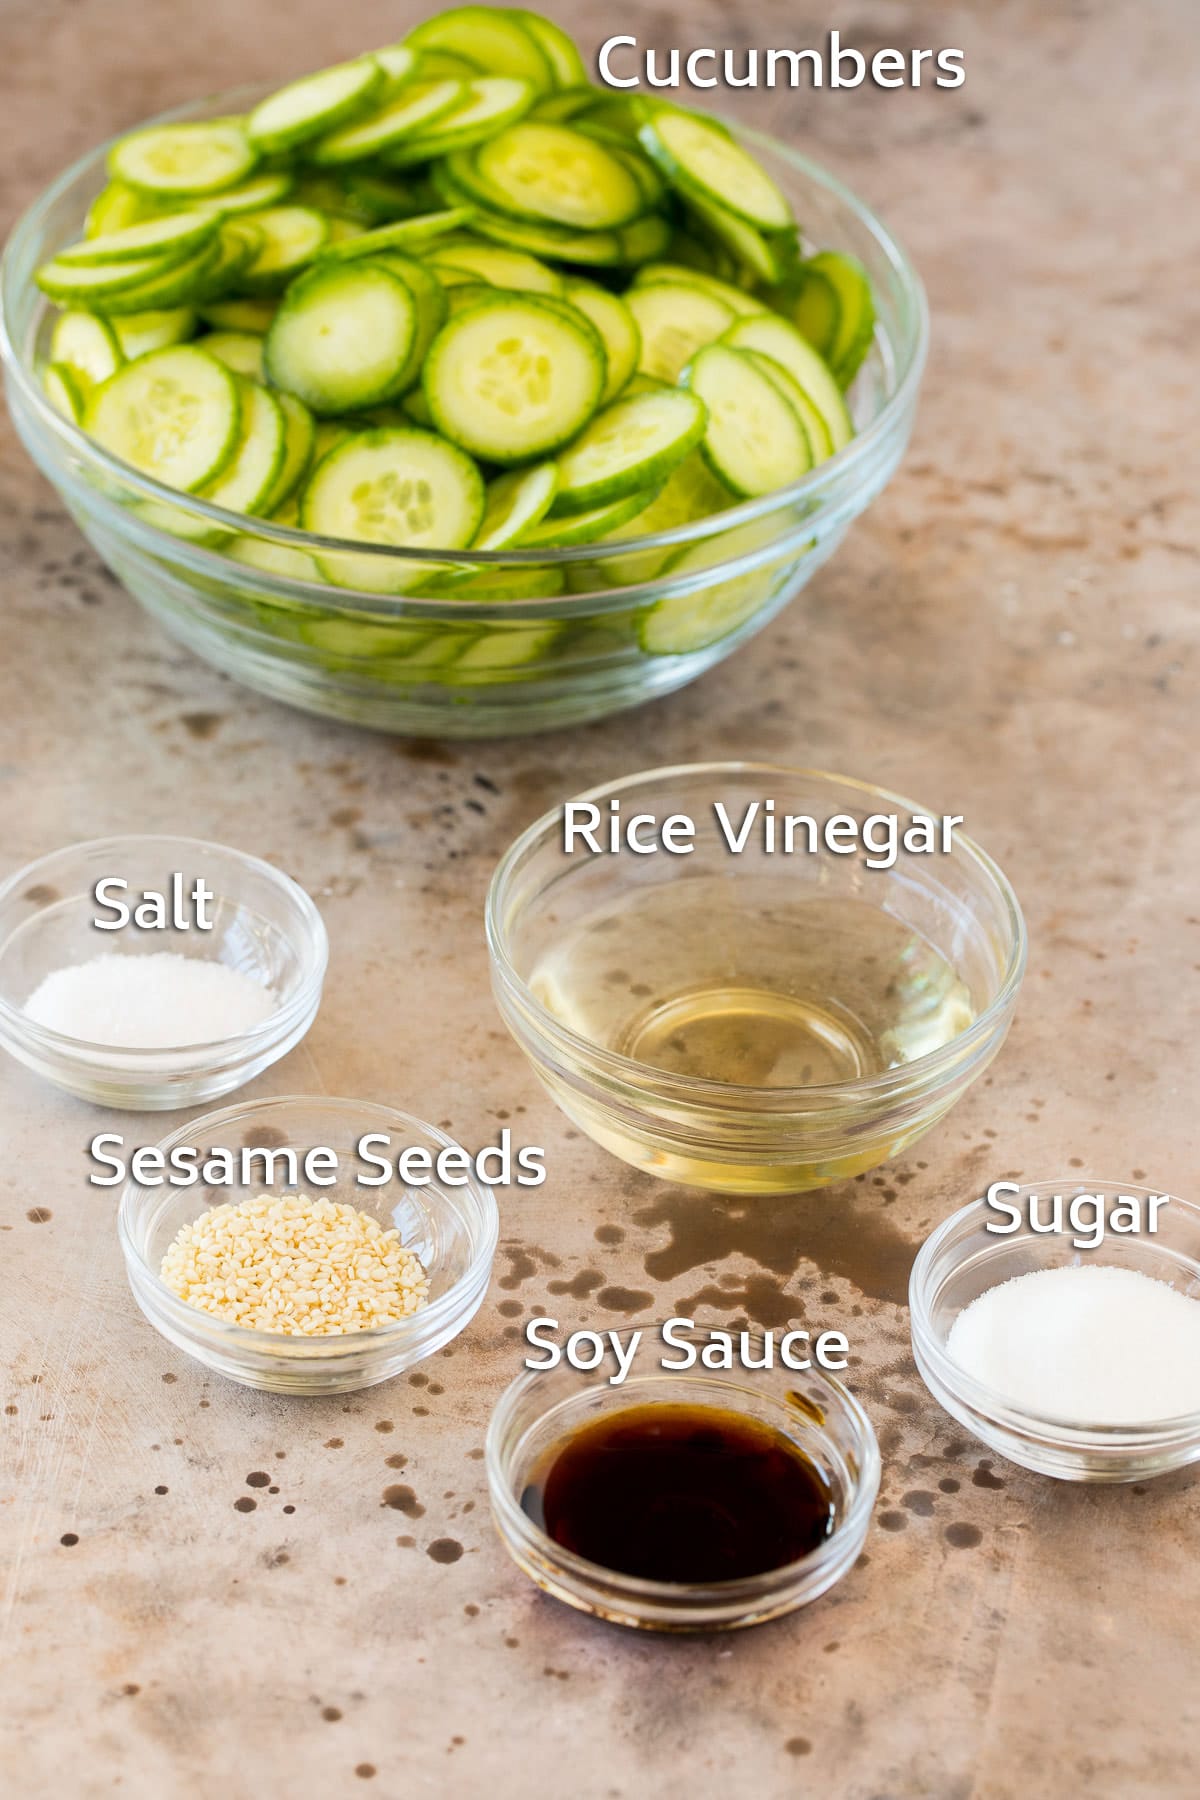 Bowls of cucumber, seasonings and soy sauce.